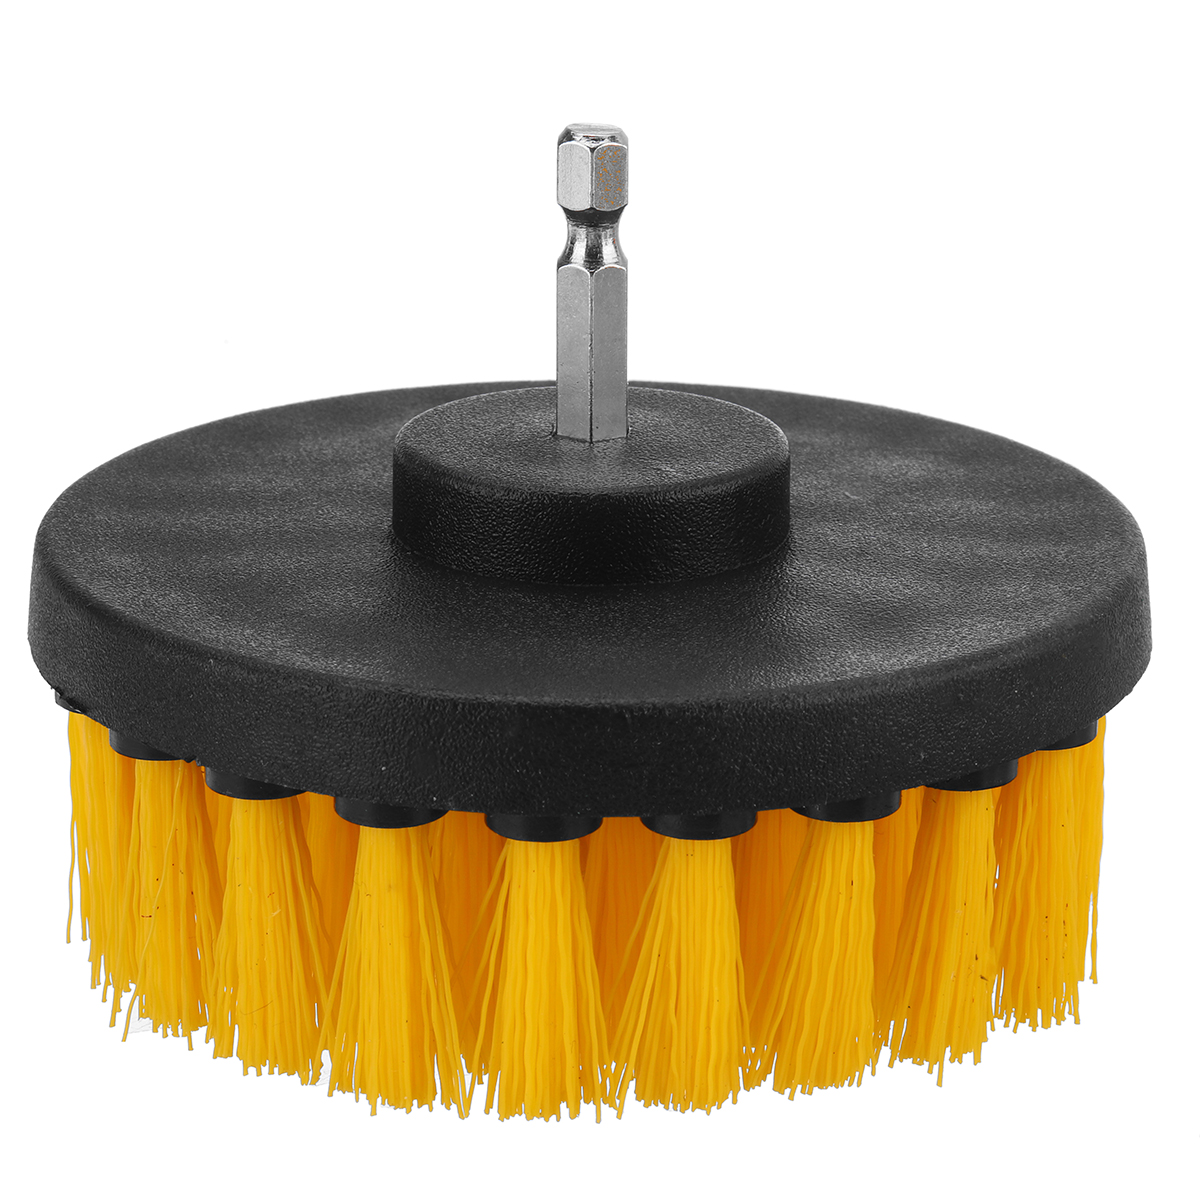 12PCS Cleaning Detailing Brush Set Dirt Dust Clean Brush for Car Motorcycle Air Vents - Auto GoShop